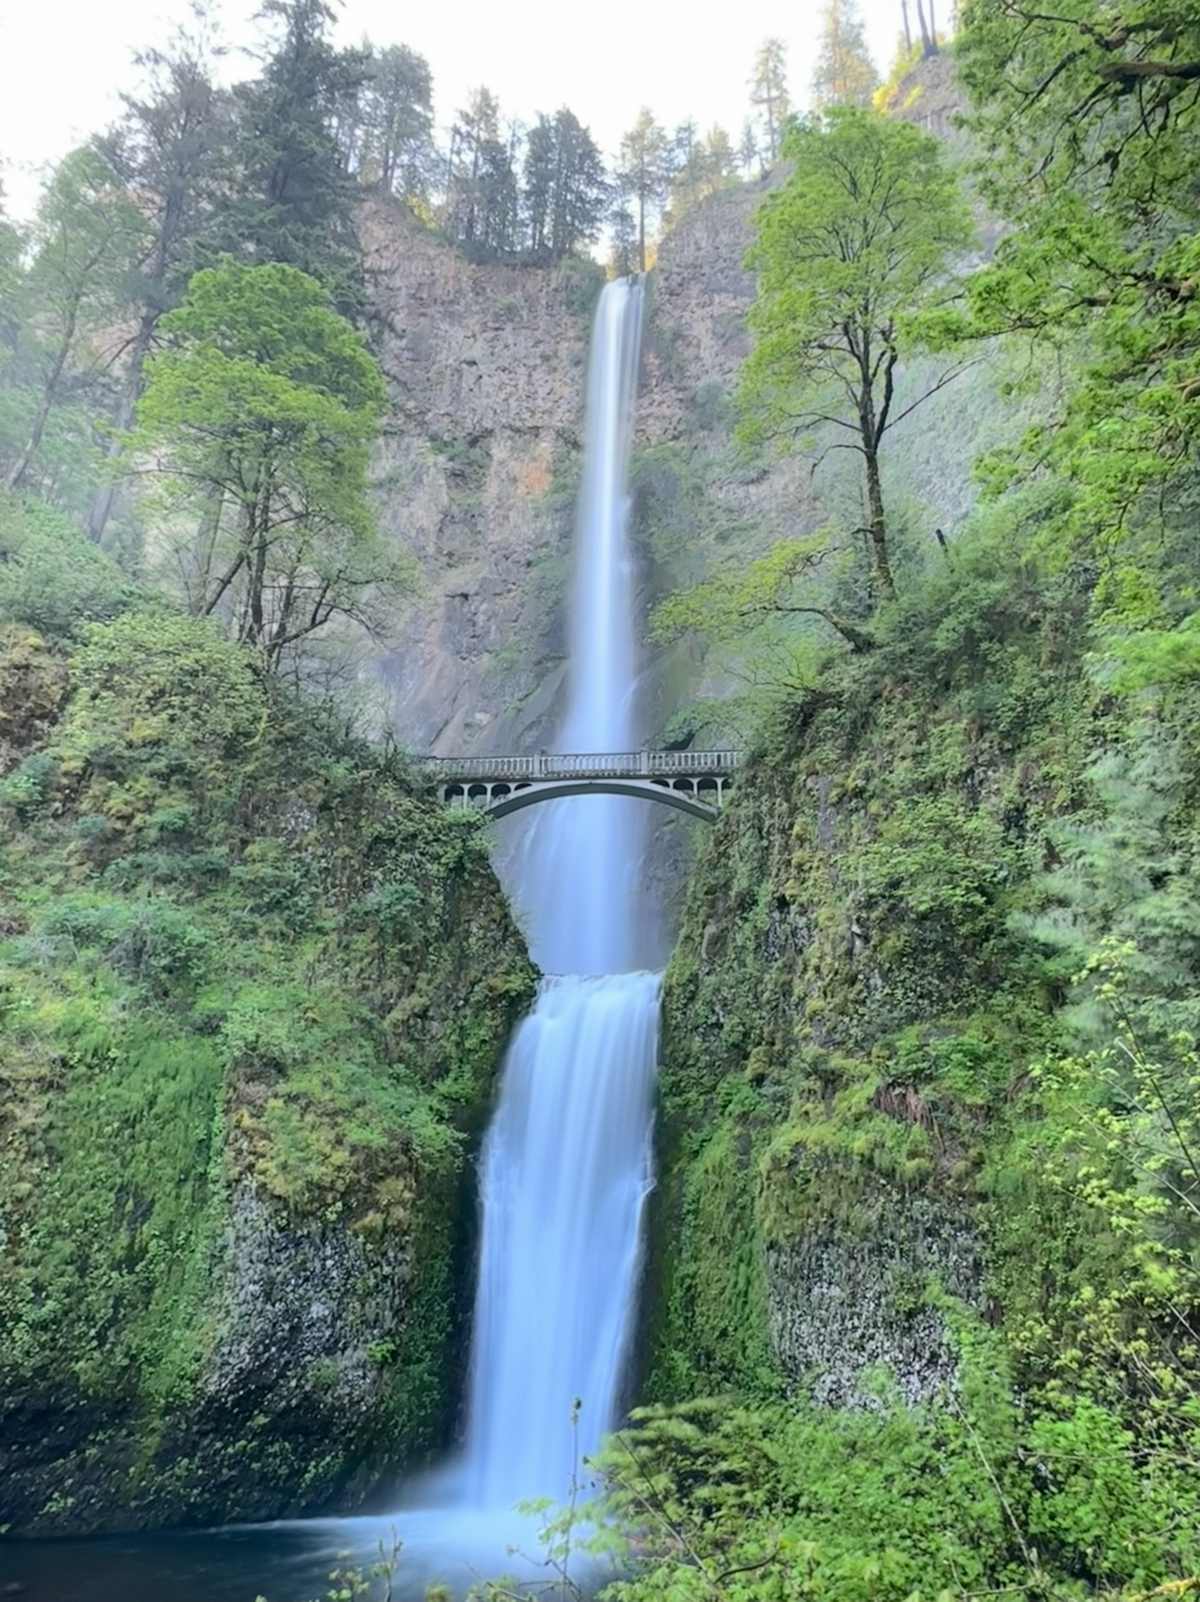 spend the weekend in portland by visitng the Multnomah Falls